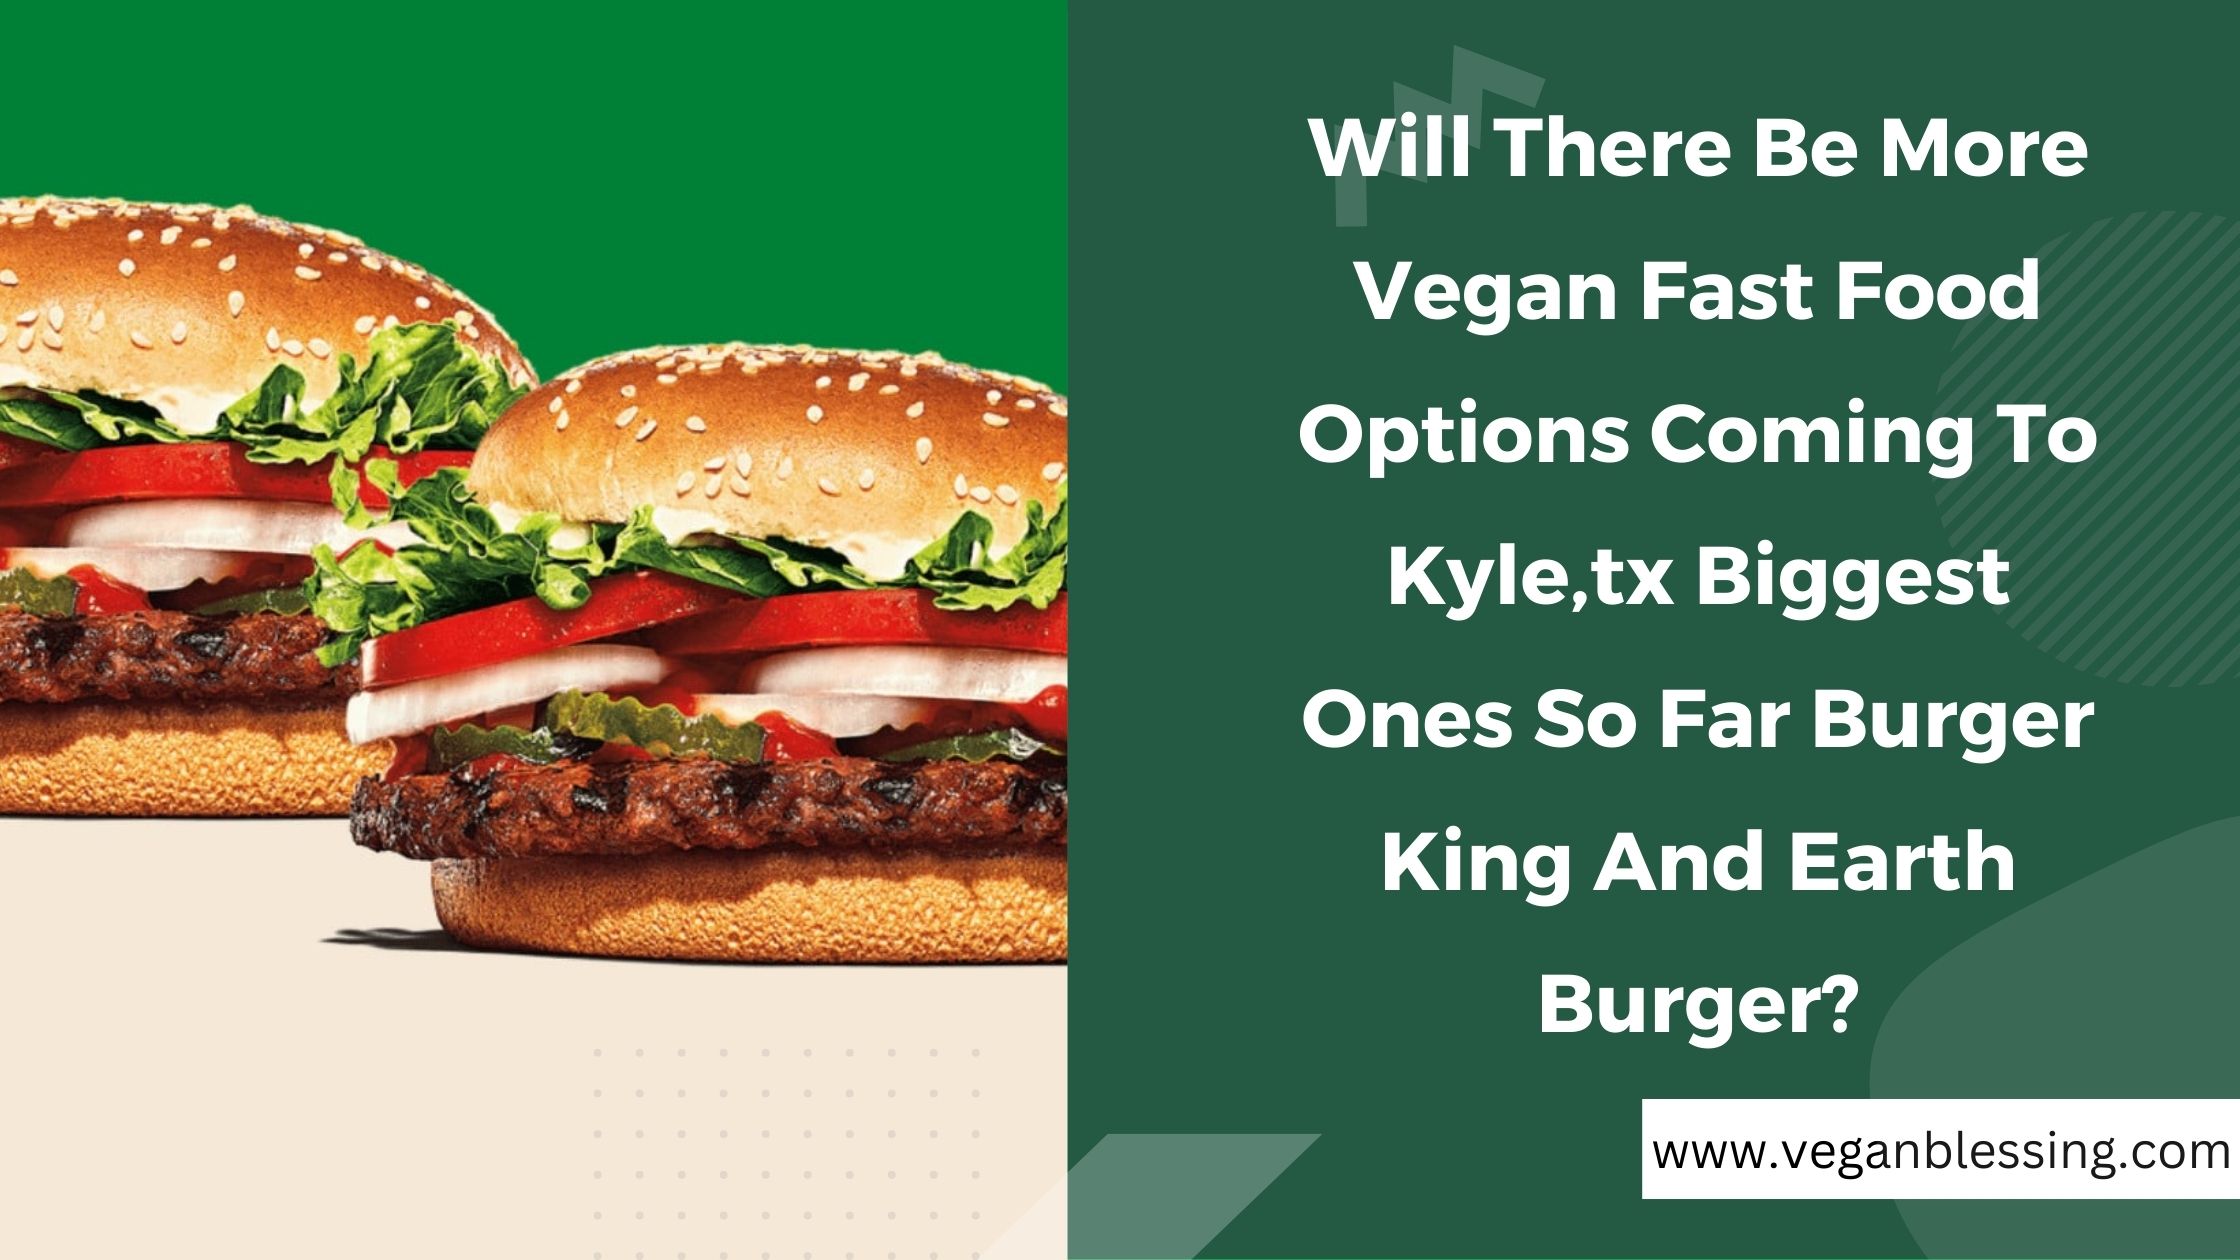 Will There Be More Vegan Fast Food Options Coming To Kyle,tx Biggest Ones So Far Burger King And Earth Burger? Will There Be More Vegan Fast Food Options Coming To Kyletx Biggest Ones So Far Burger King And Earth Burger